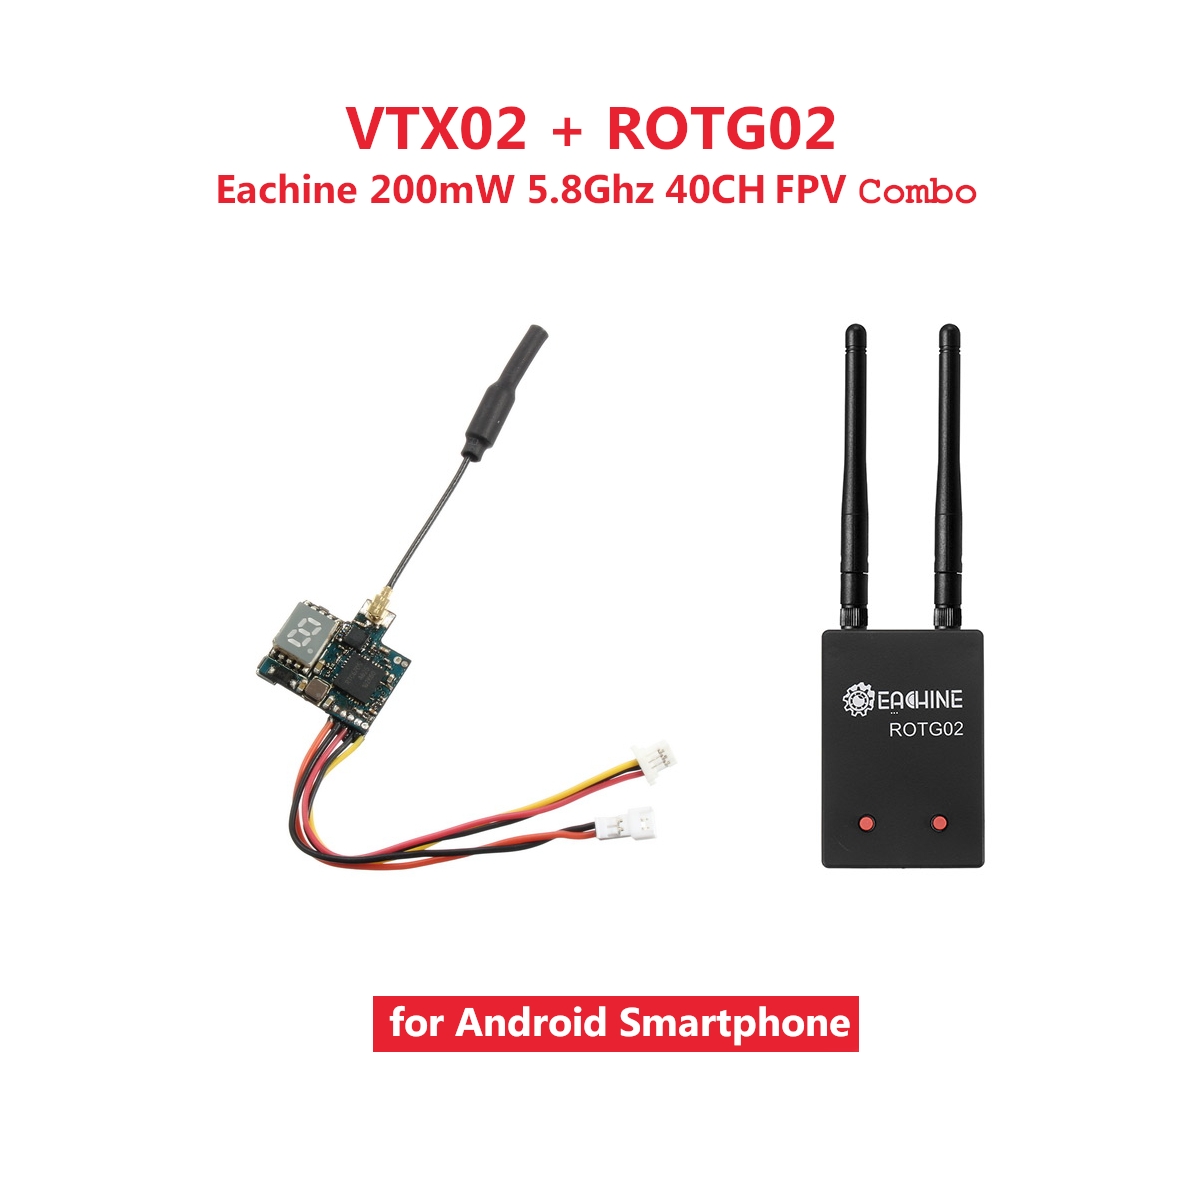 Eachine VTX02 + ROTG02 FPV Combo 5.8G 40CH 200mW Diversity Audio Transmitter Receiver Set Black for Android Phone